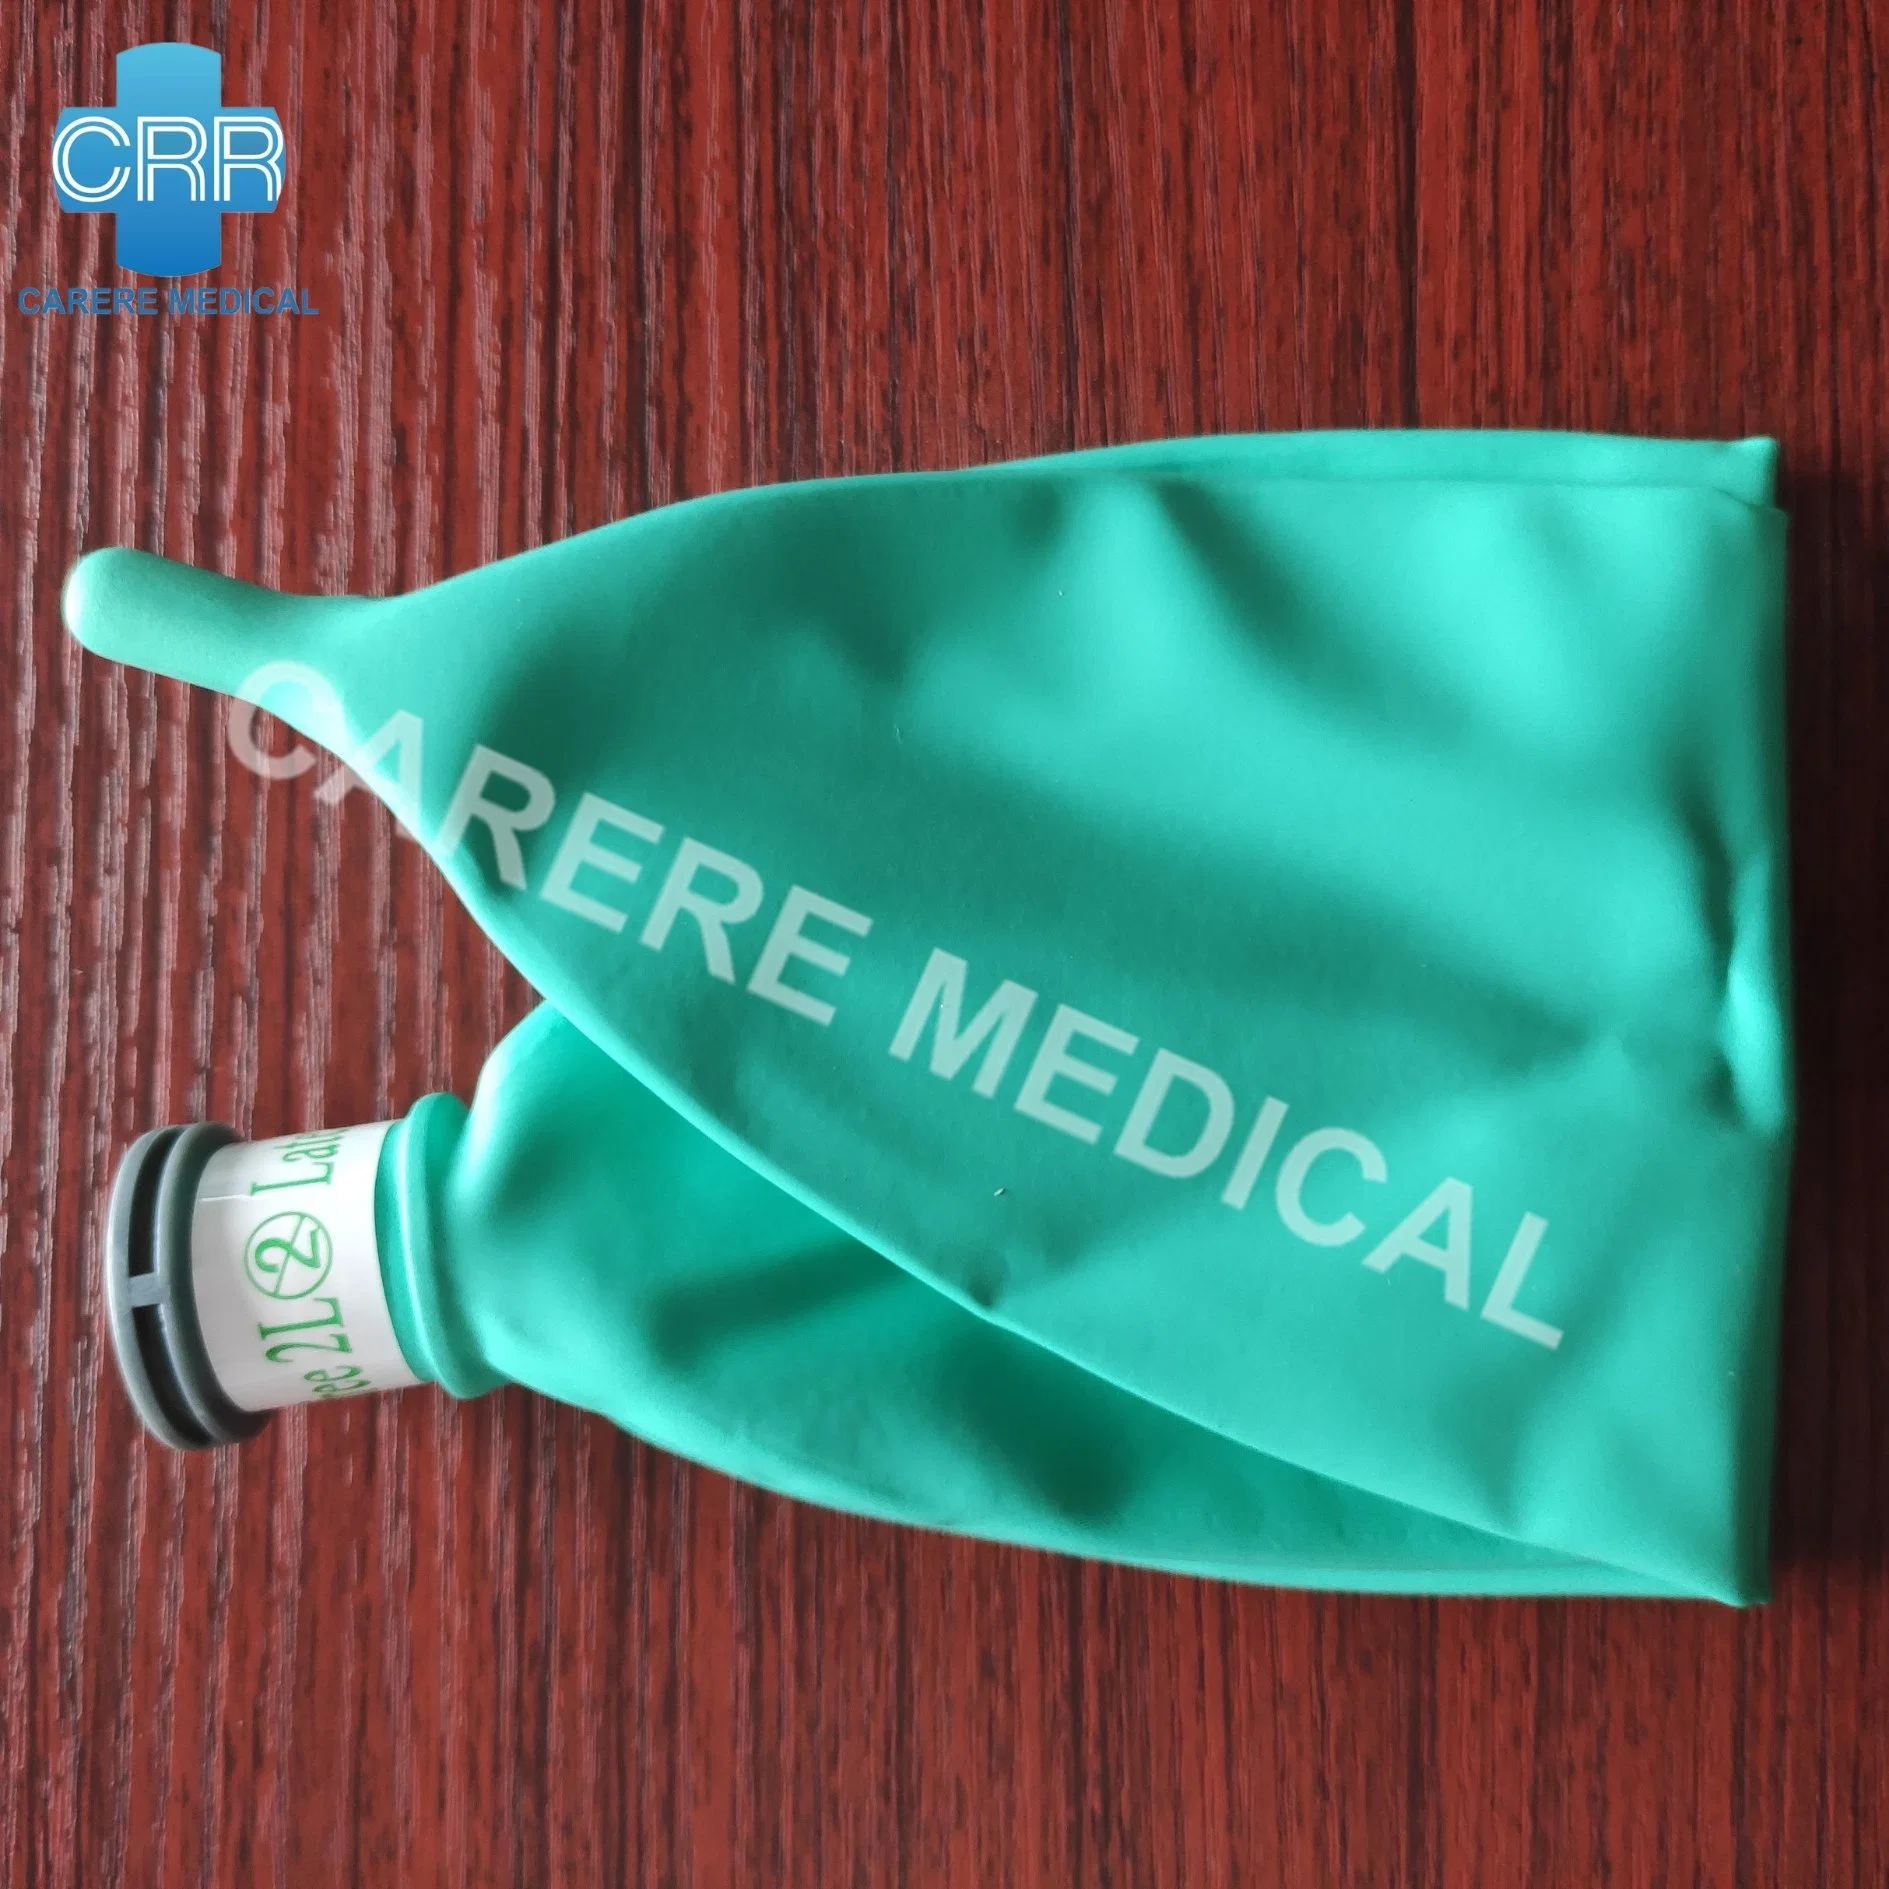 Factory Price Disposable Medical Supplies Breathing Bag Green Latex Free Bag Breathing Reservoir Bag for Adult Pediatric Infant with CE ISO